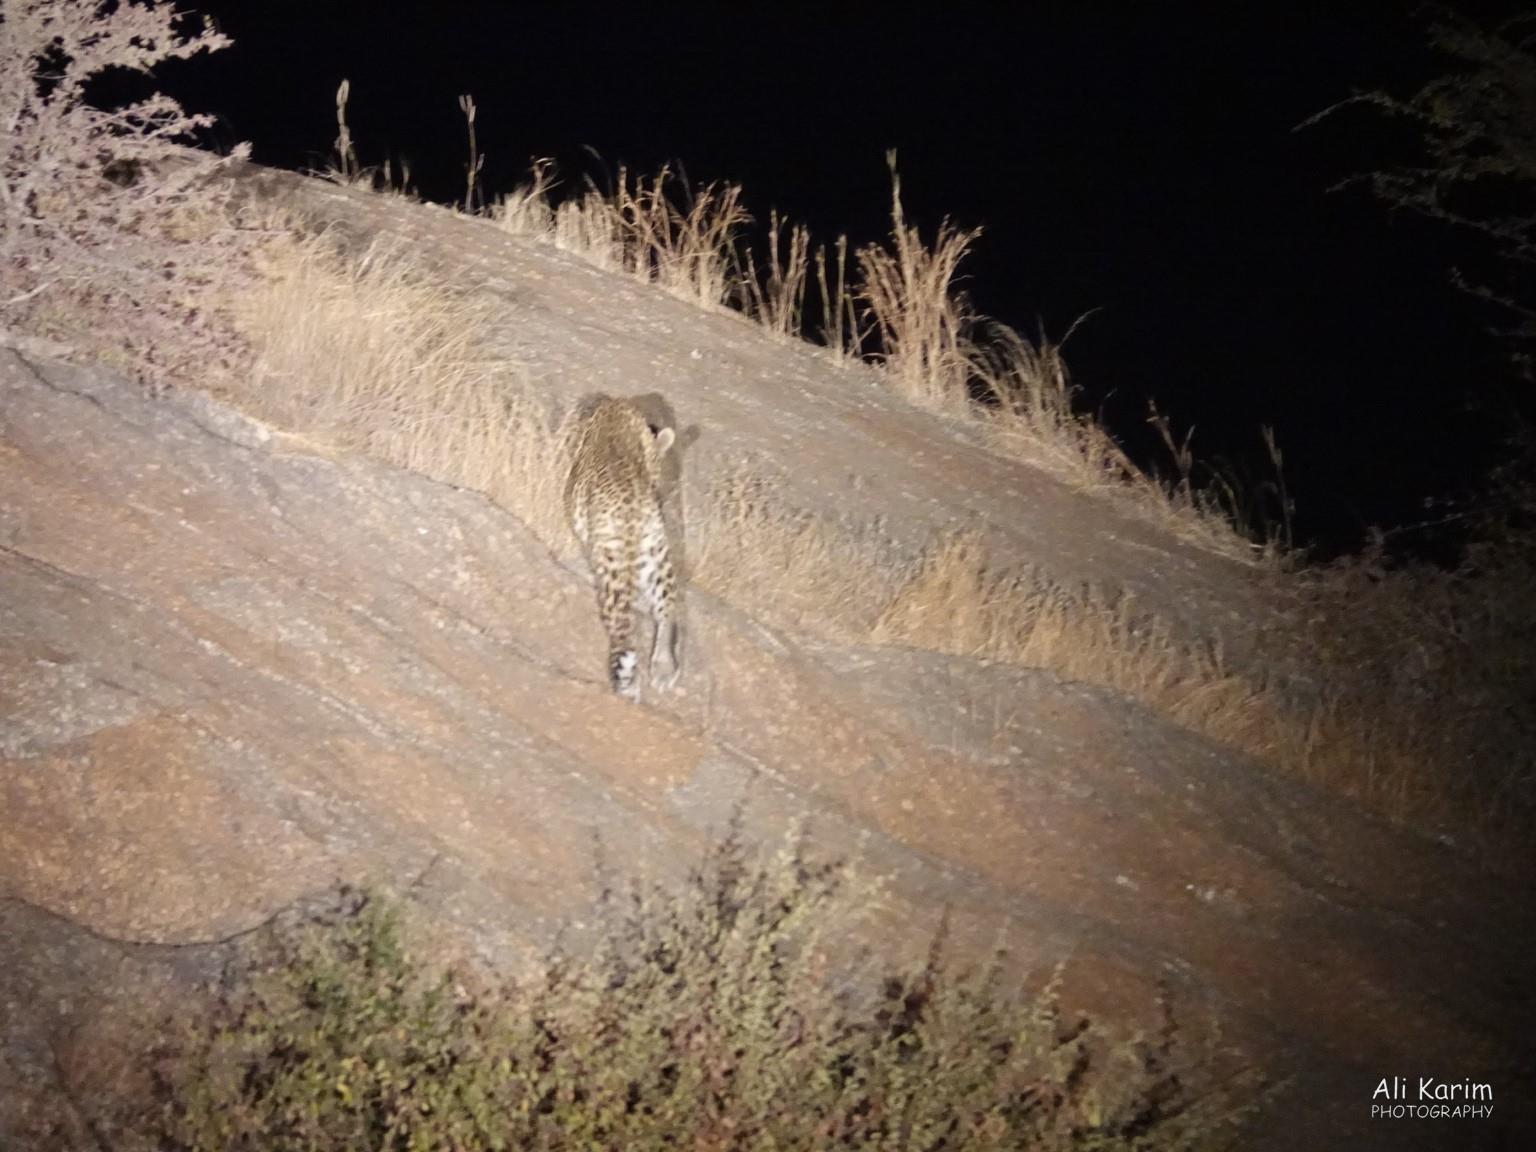 Leopards, Bera, Rajasthan Caught at night with searchlights, near some homes. Next morning, we learnt that there was a goat that was killed that night near where we saw this leopard. 